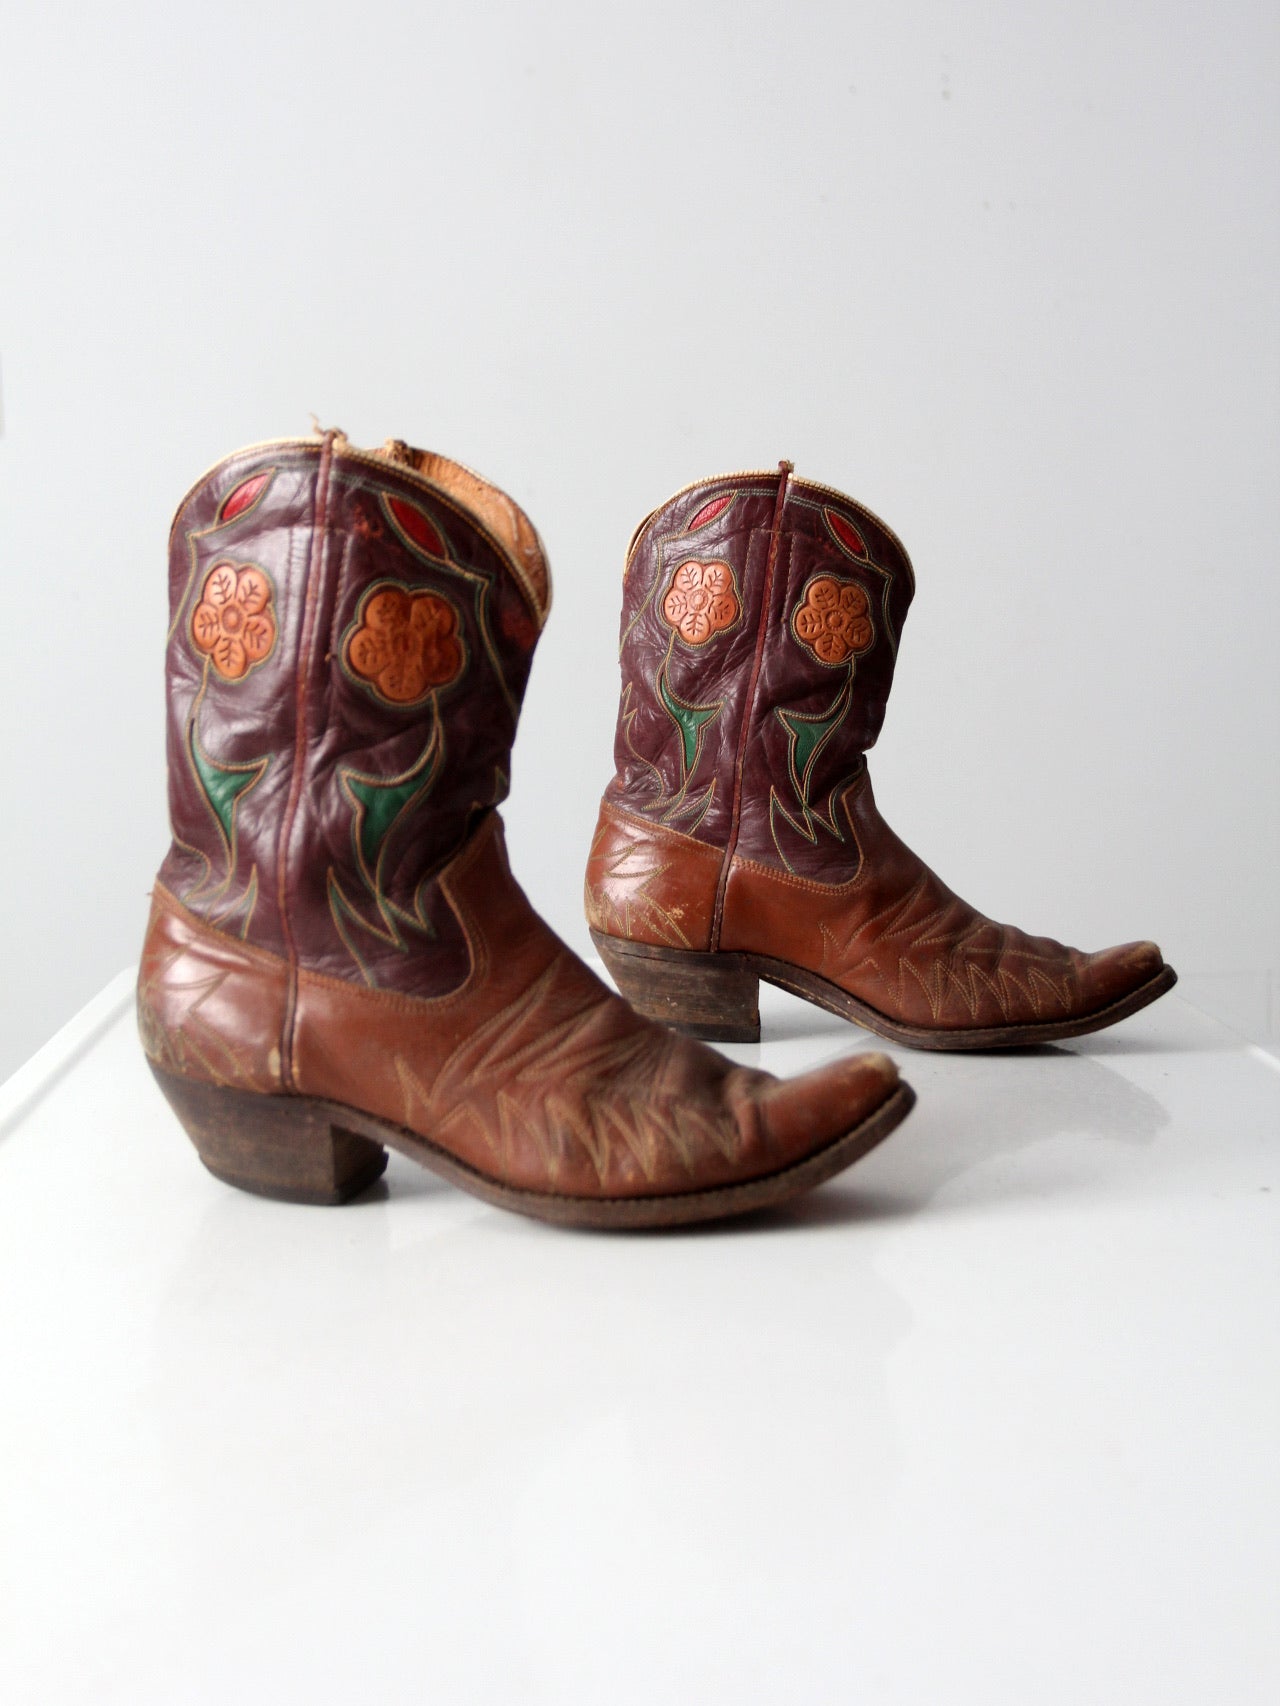 vintage 50s Acme inlay boots, size 10 D